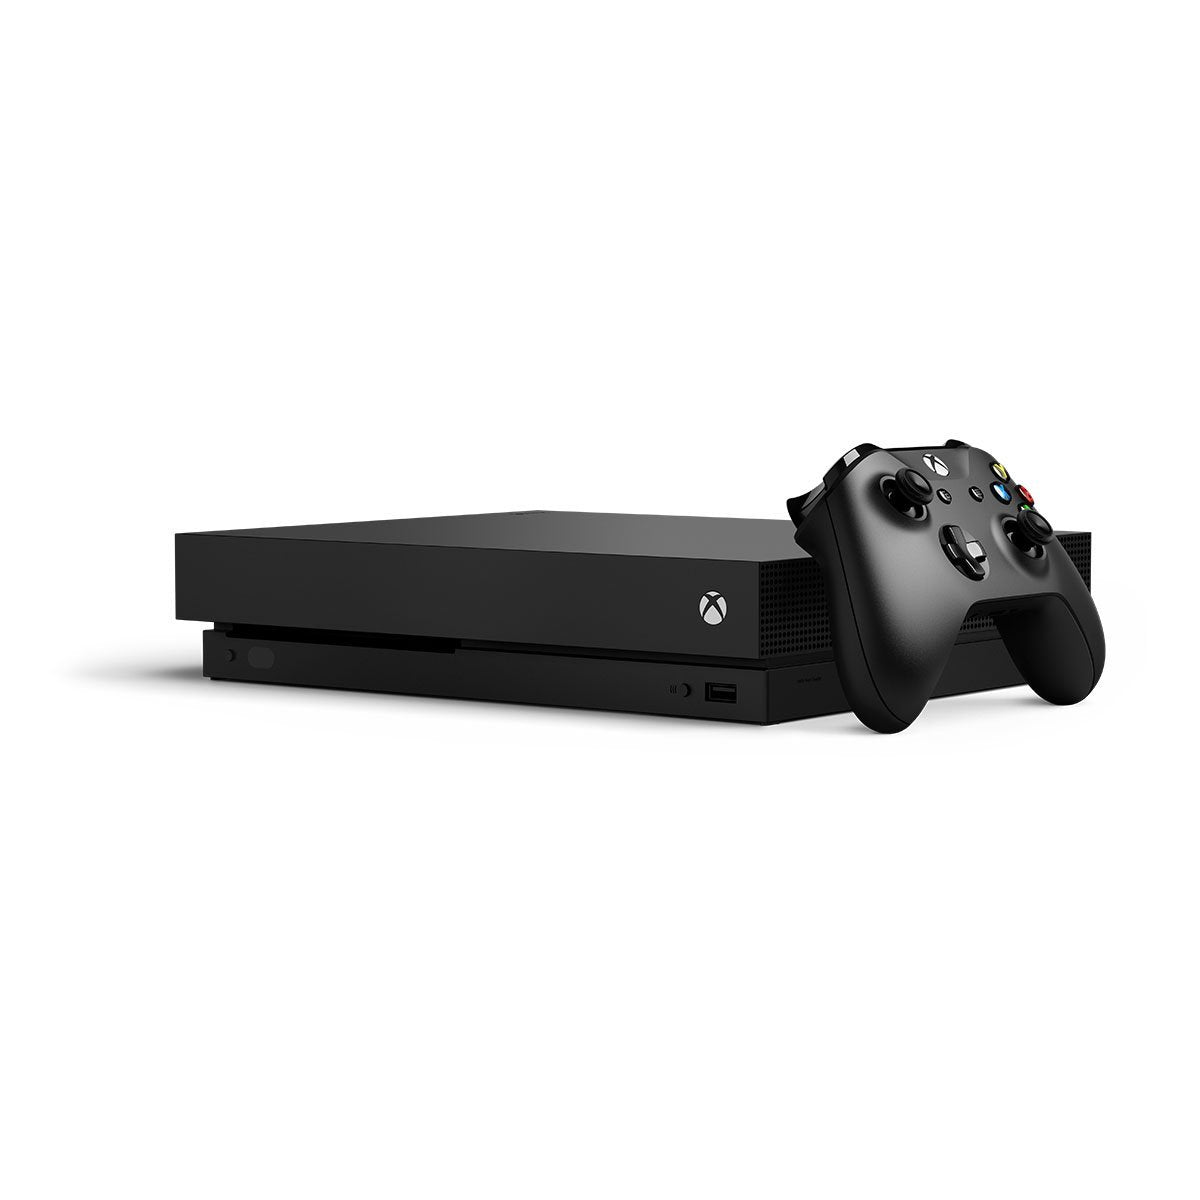 Microsoft Xbox One X Console, 500GB Storage with Accessories - Black (Pre-Owned)